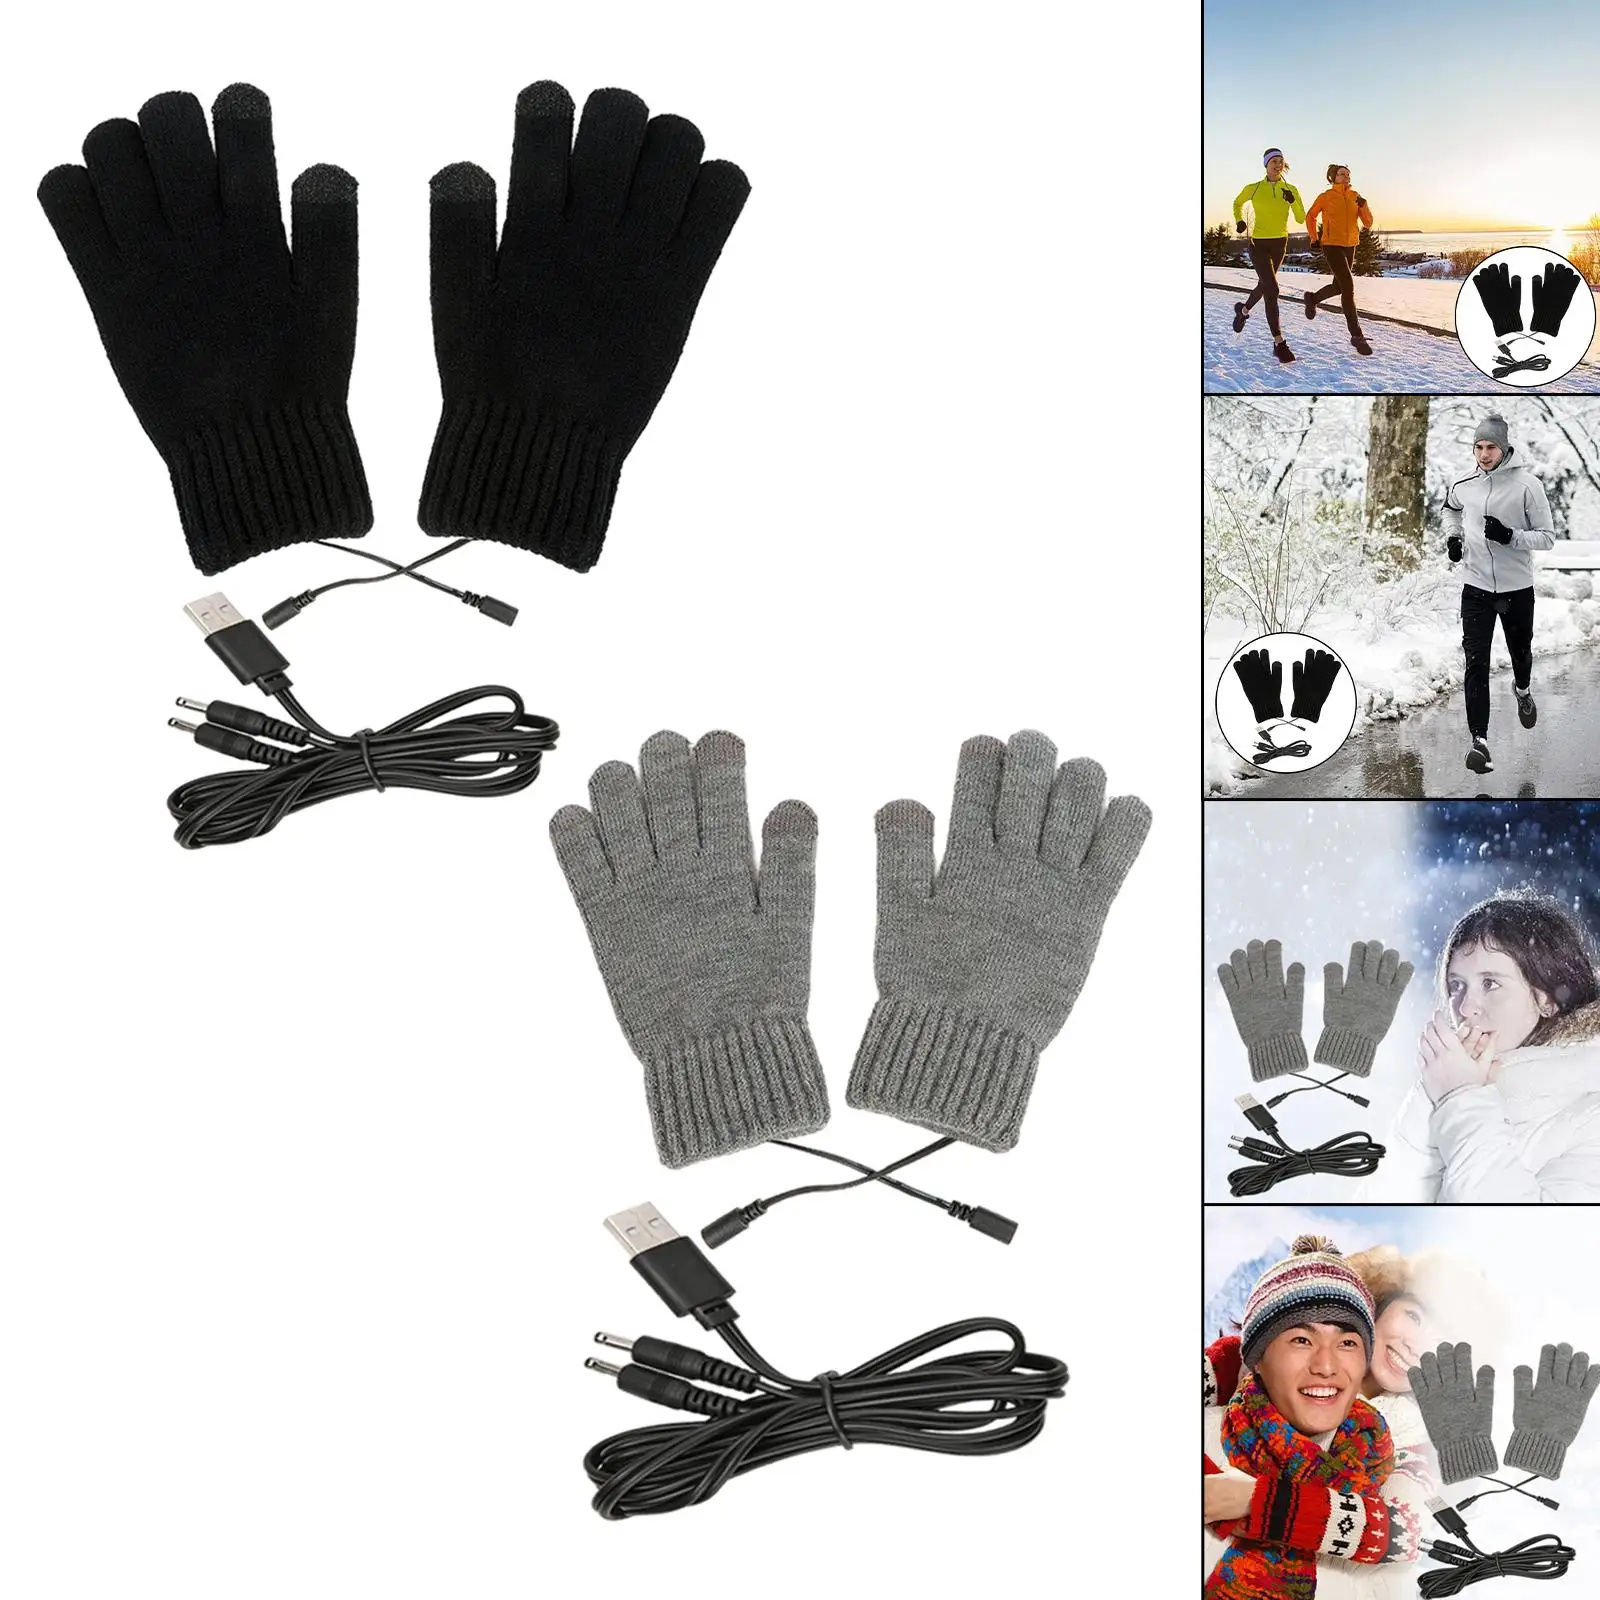  USB Heating Gloves Electric Thermal Knitting Laptop Gloves for Skiing